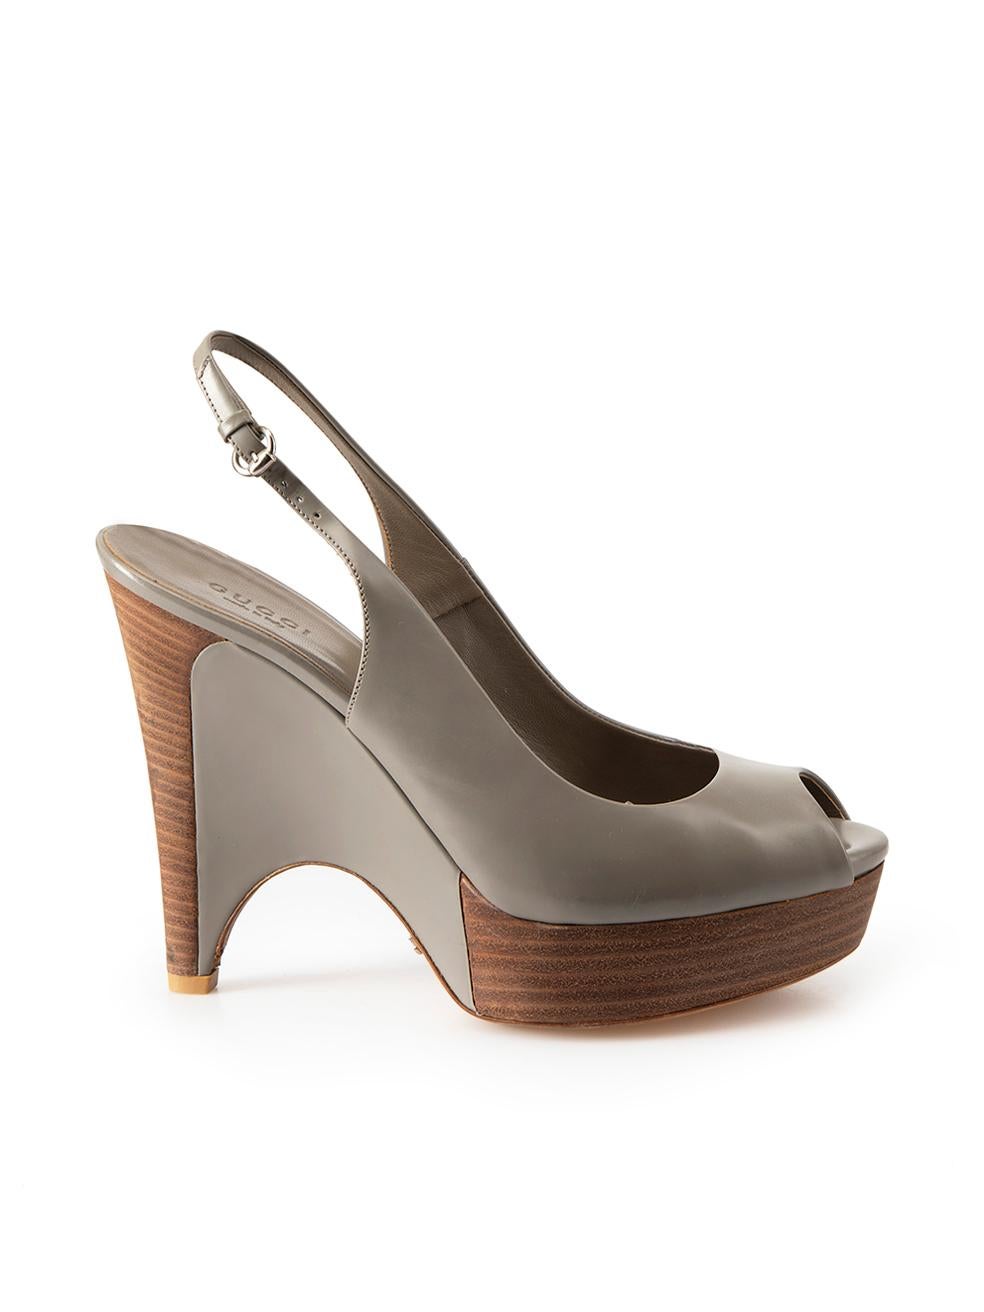 Gucci Grey Leather Slingback Heeled Sandals Size IT 37 For Sale